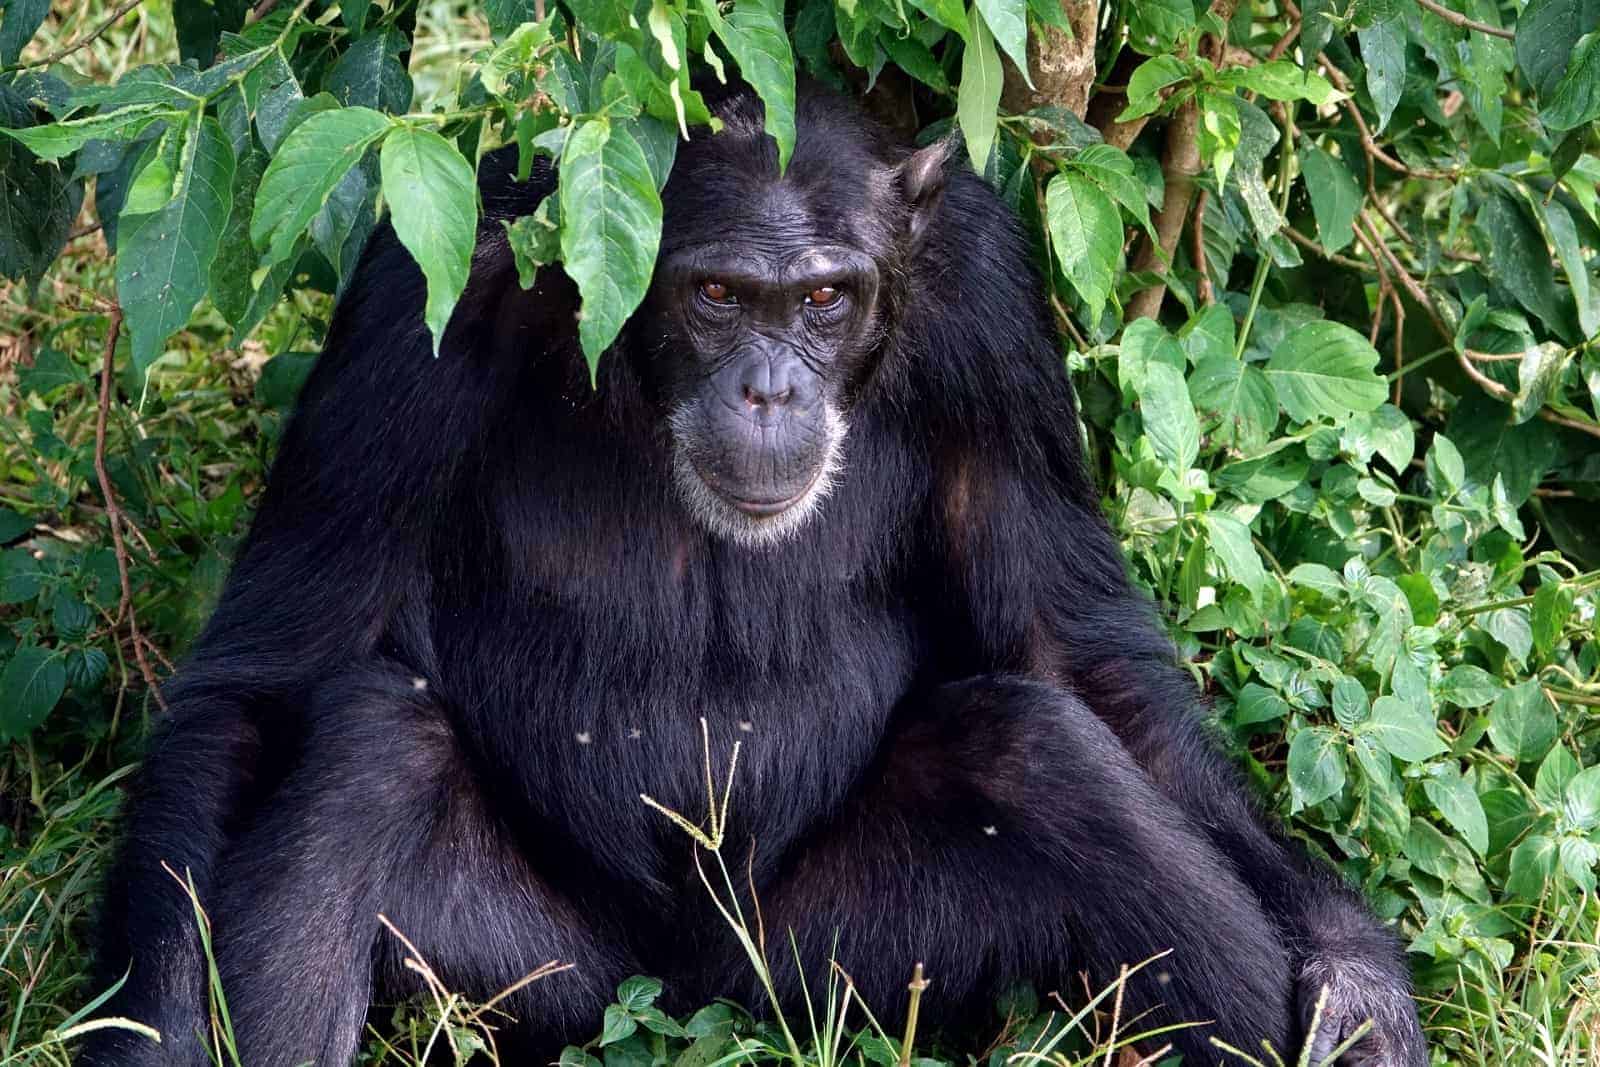 What great apes feces tell us about human health and digestive disorders